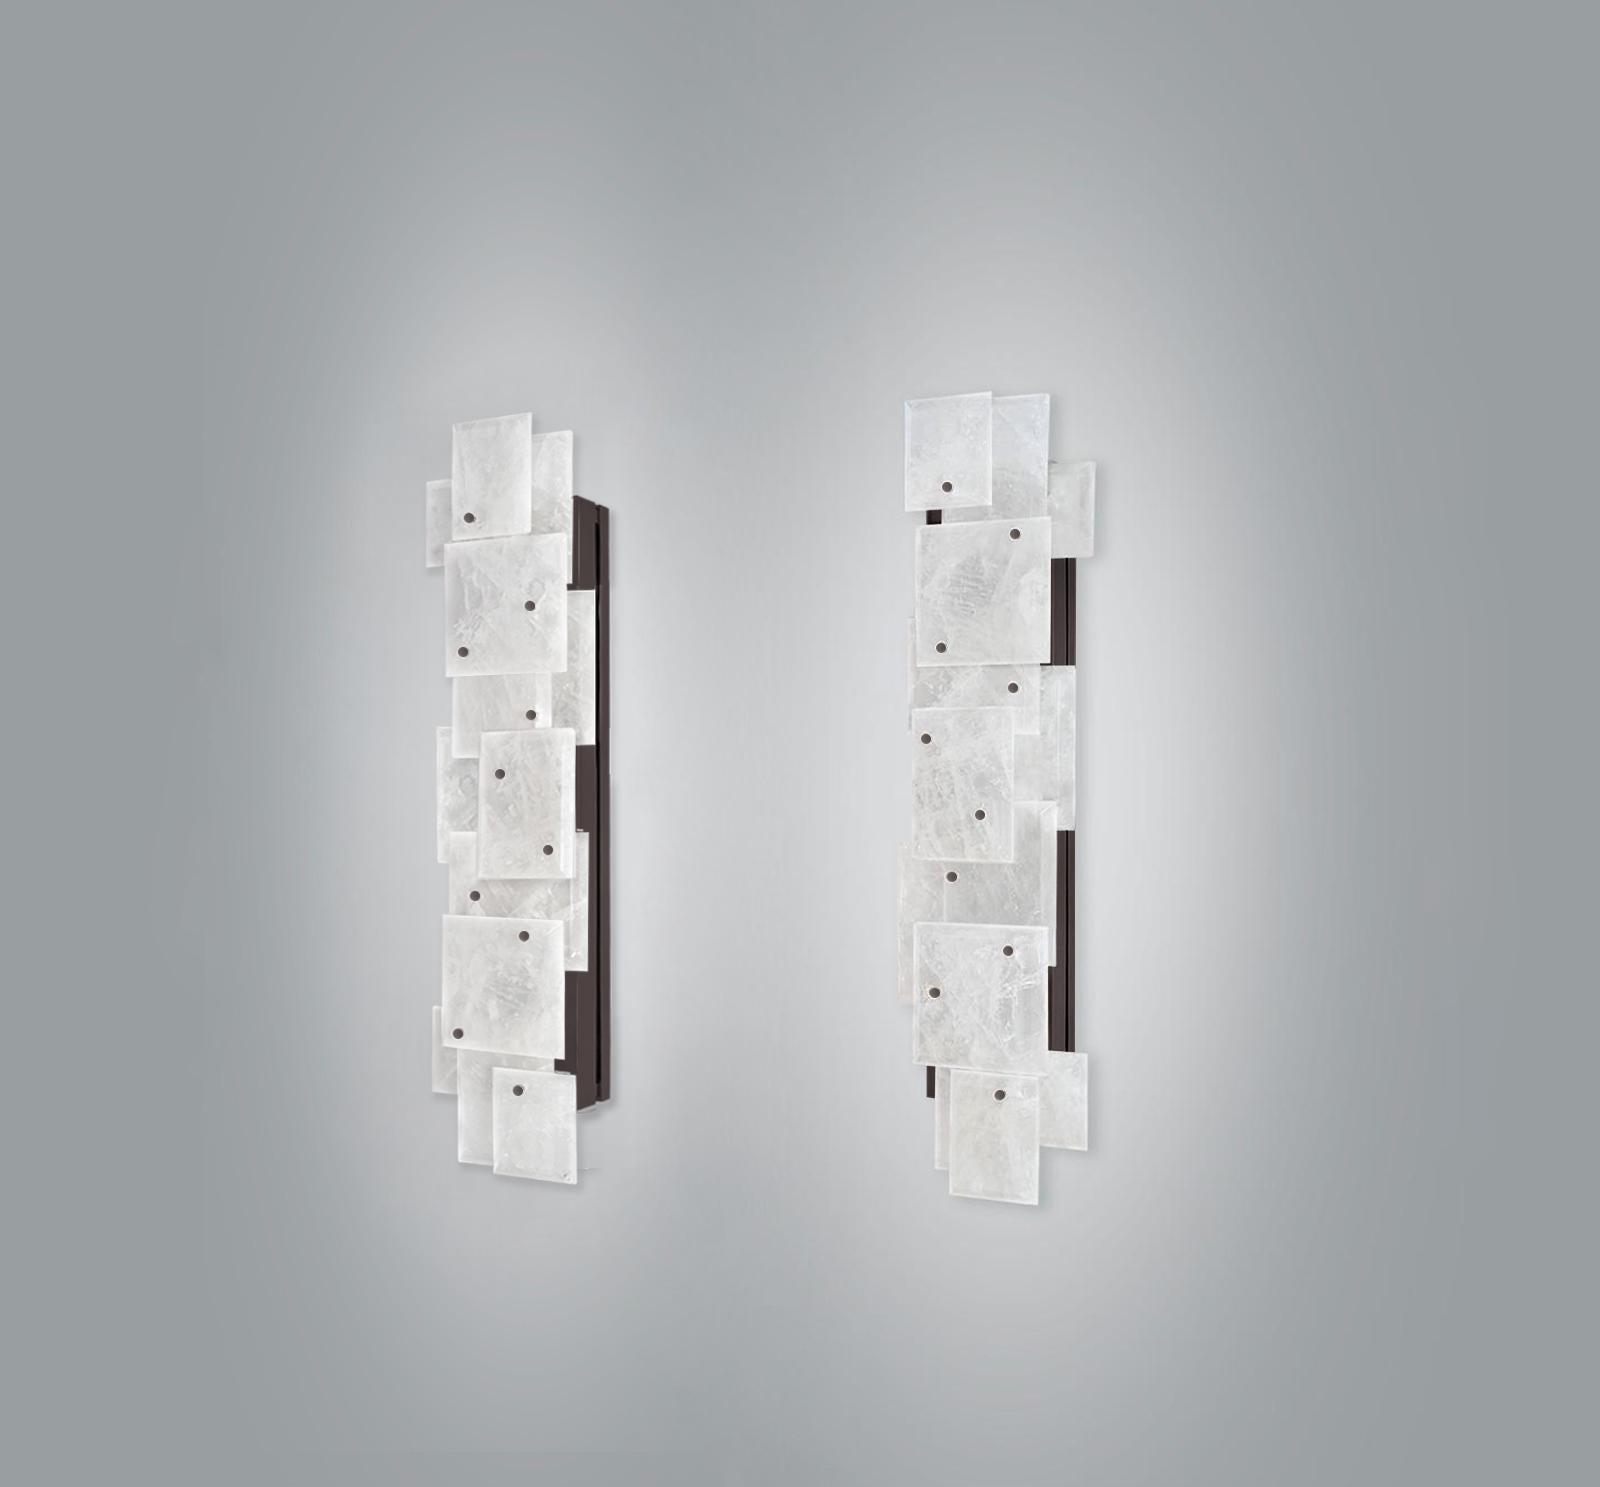 Pair of modern rock crystal quartz sconces with multiple panels decorations in antique brass finish. Created by Phoenix Gallery.
Each sconce installed four sockets, use four 75 watts Led warm light bulbs, 300watts total. Light bulbs supplied.